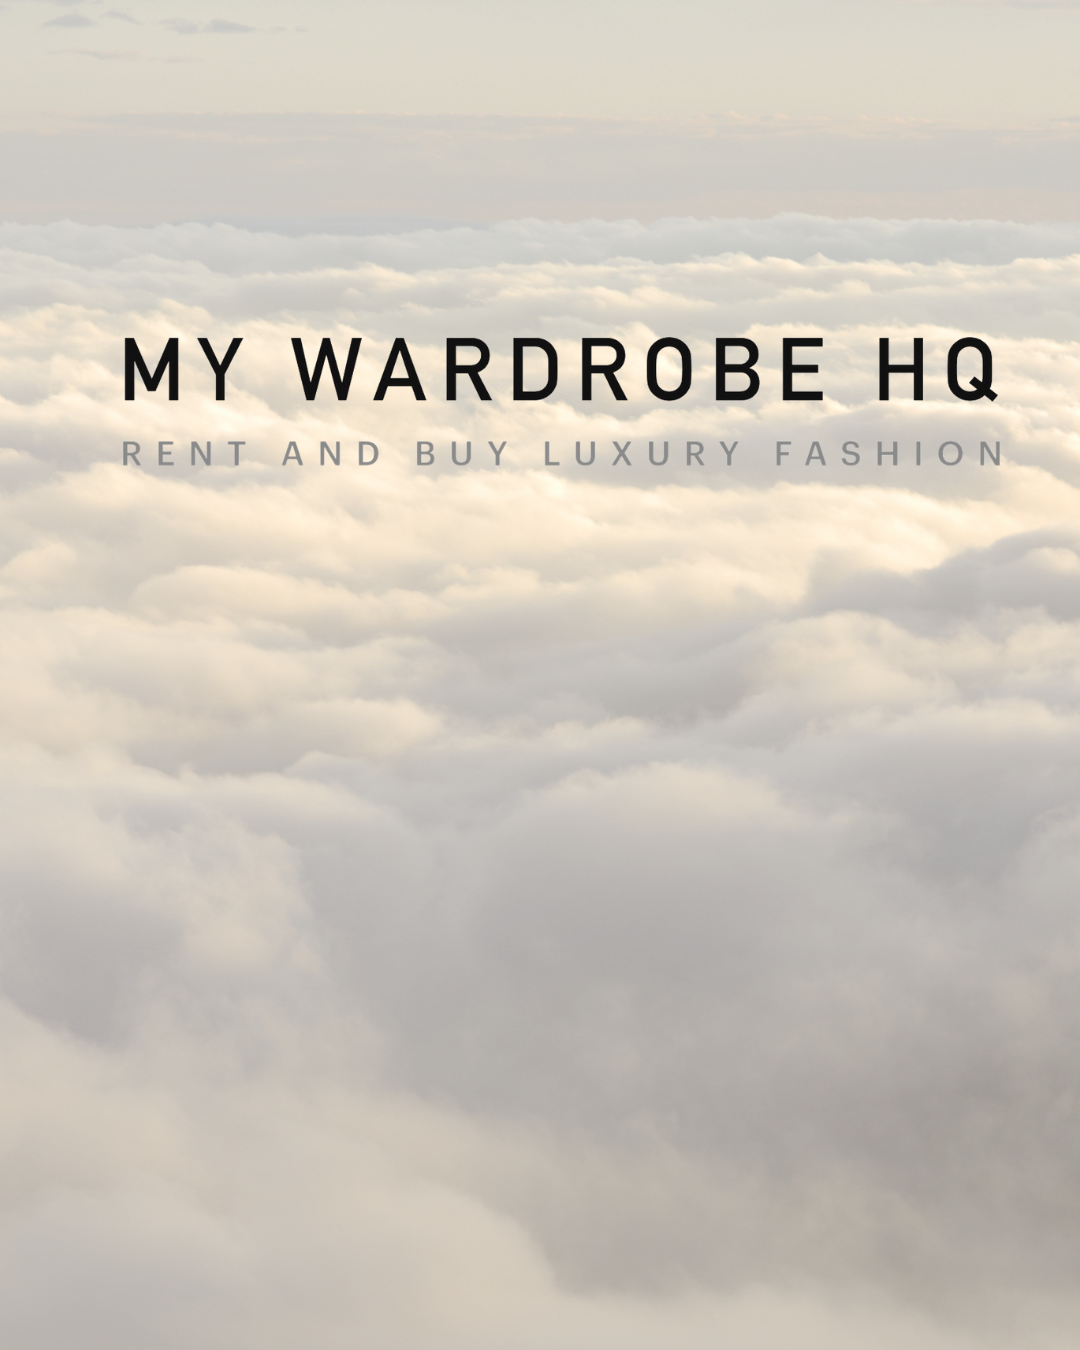 Backdrop of Clouds with 'My Wardrobe HQ Rent and Buy Luxury Fashion' written across the image